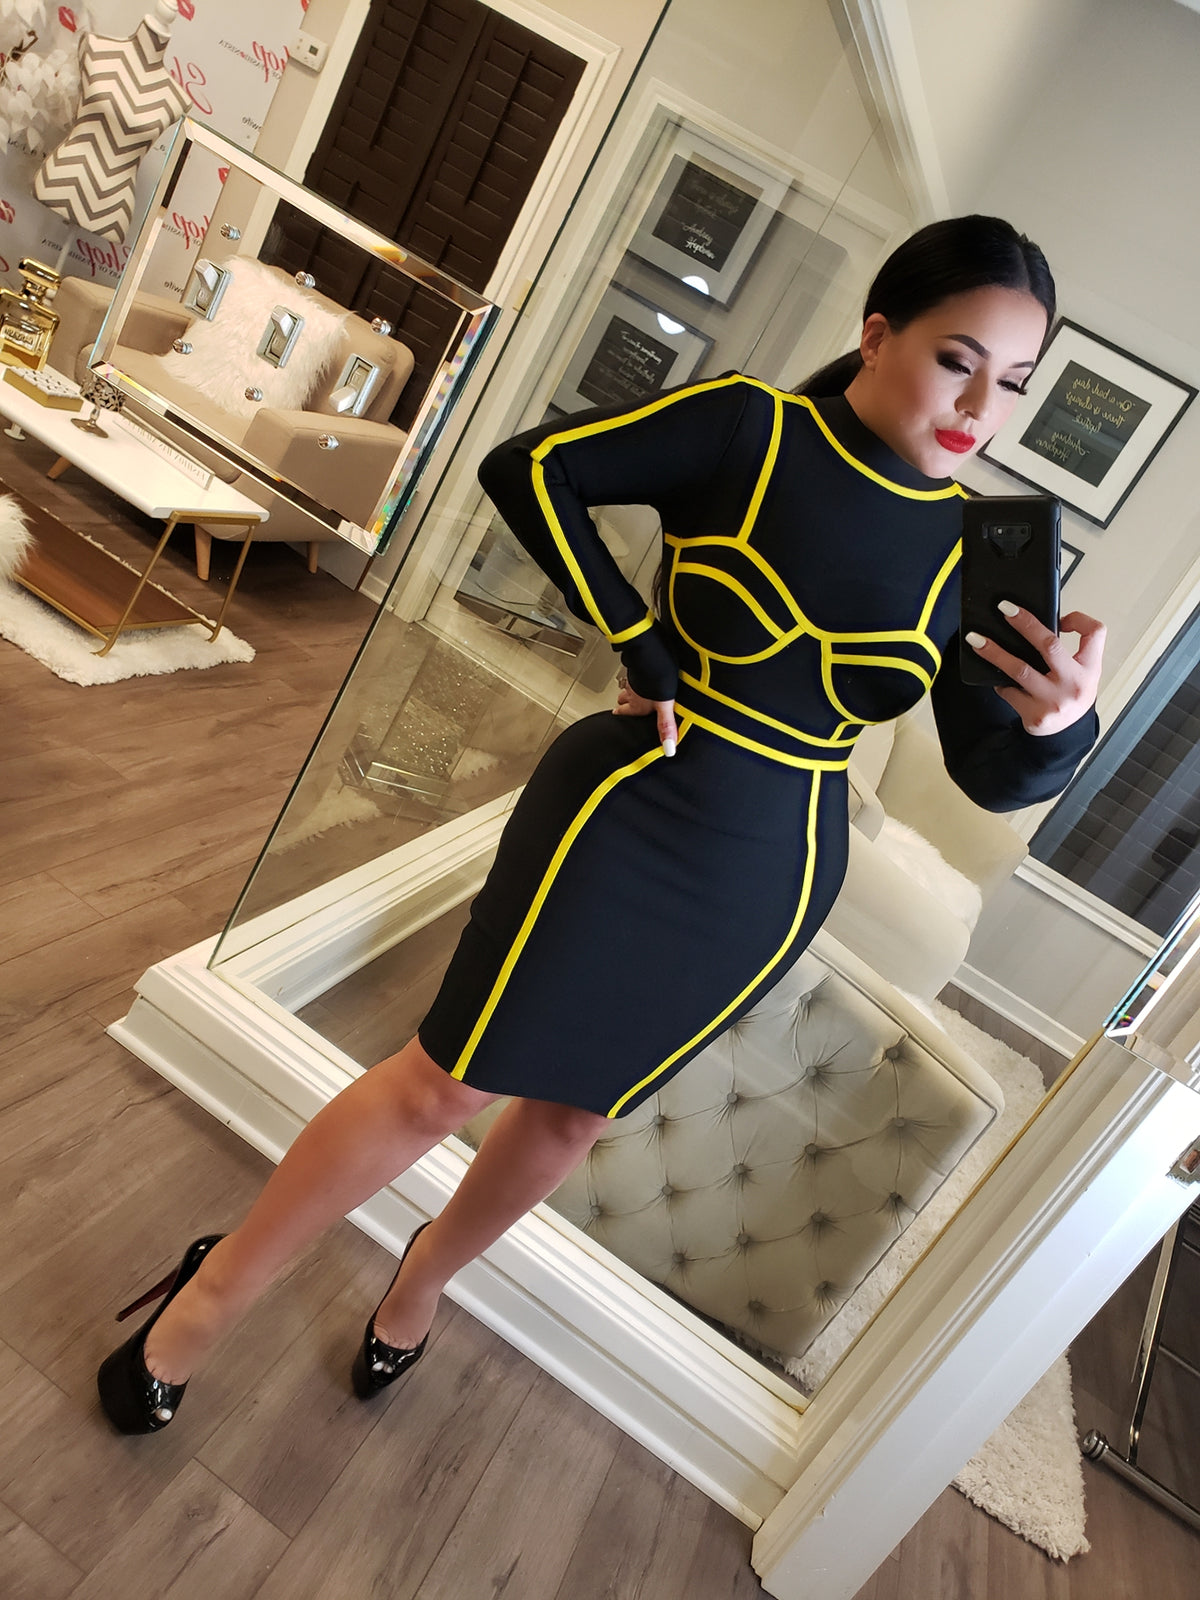 For the love of Neon Bandage Dress